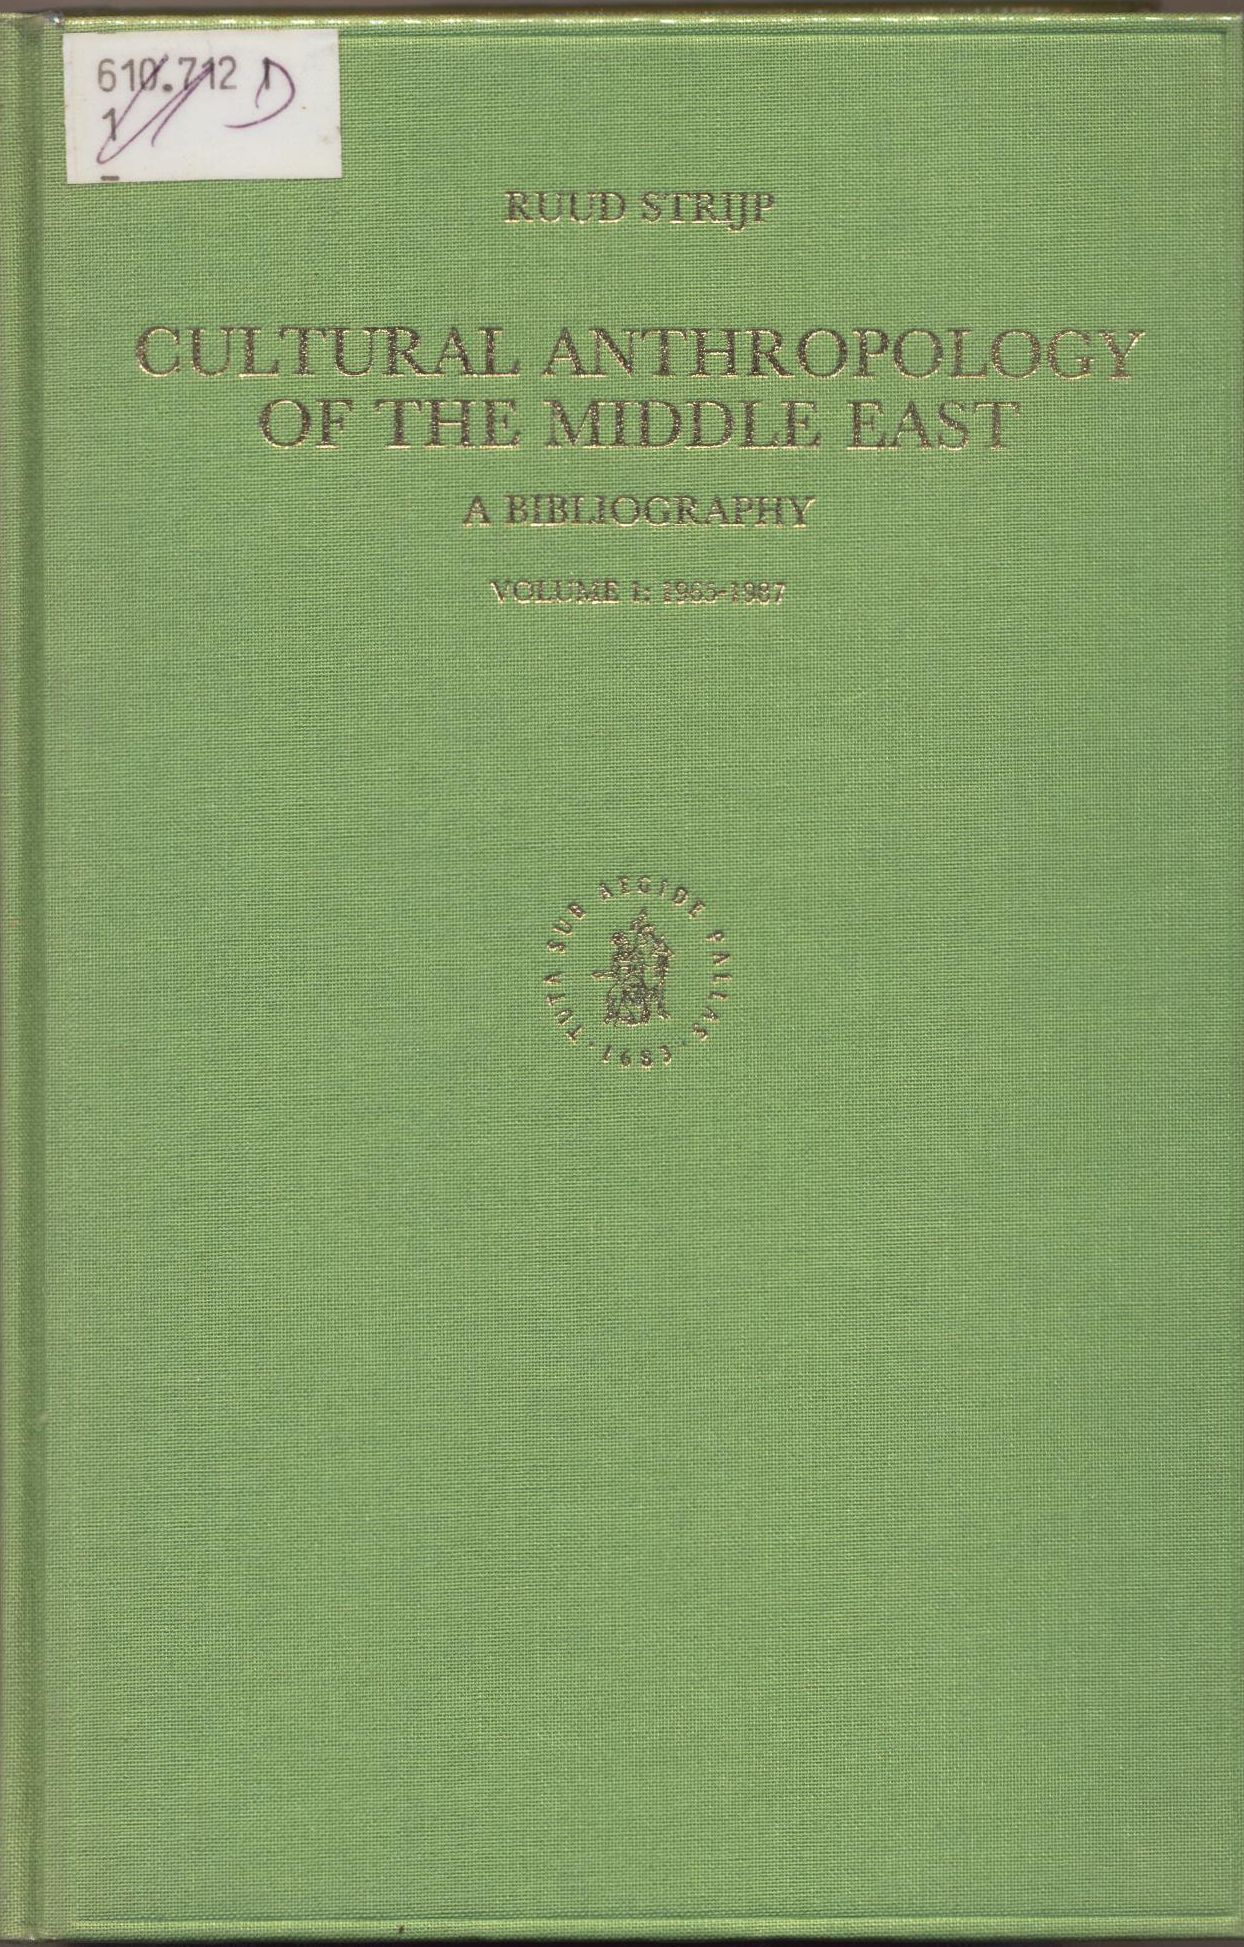 Handbuch der Orientalistik / Cultural Anthropology of the Middle East A Bibliography. Volume 1: 1965-1987 - Strijp, Ruud